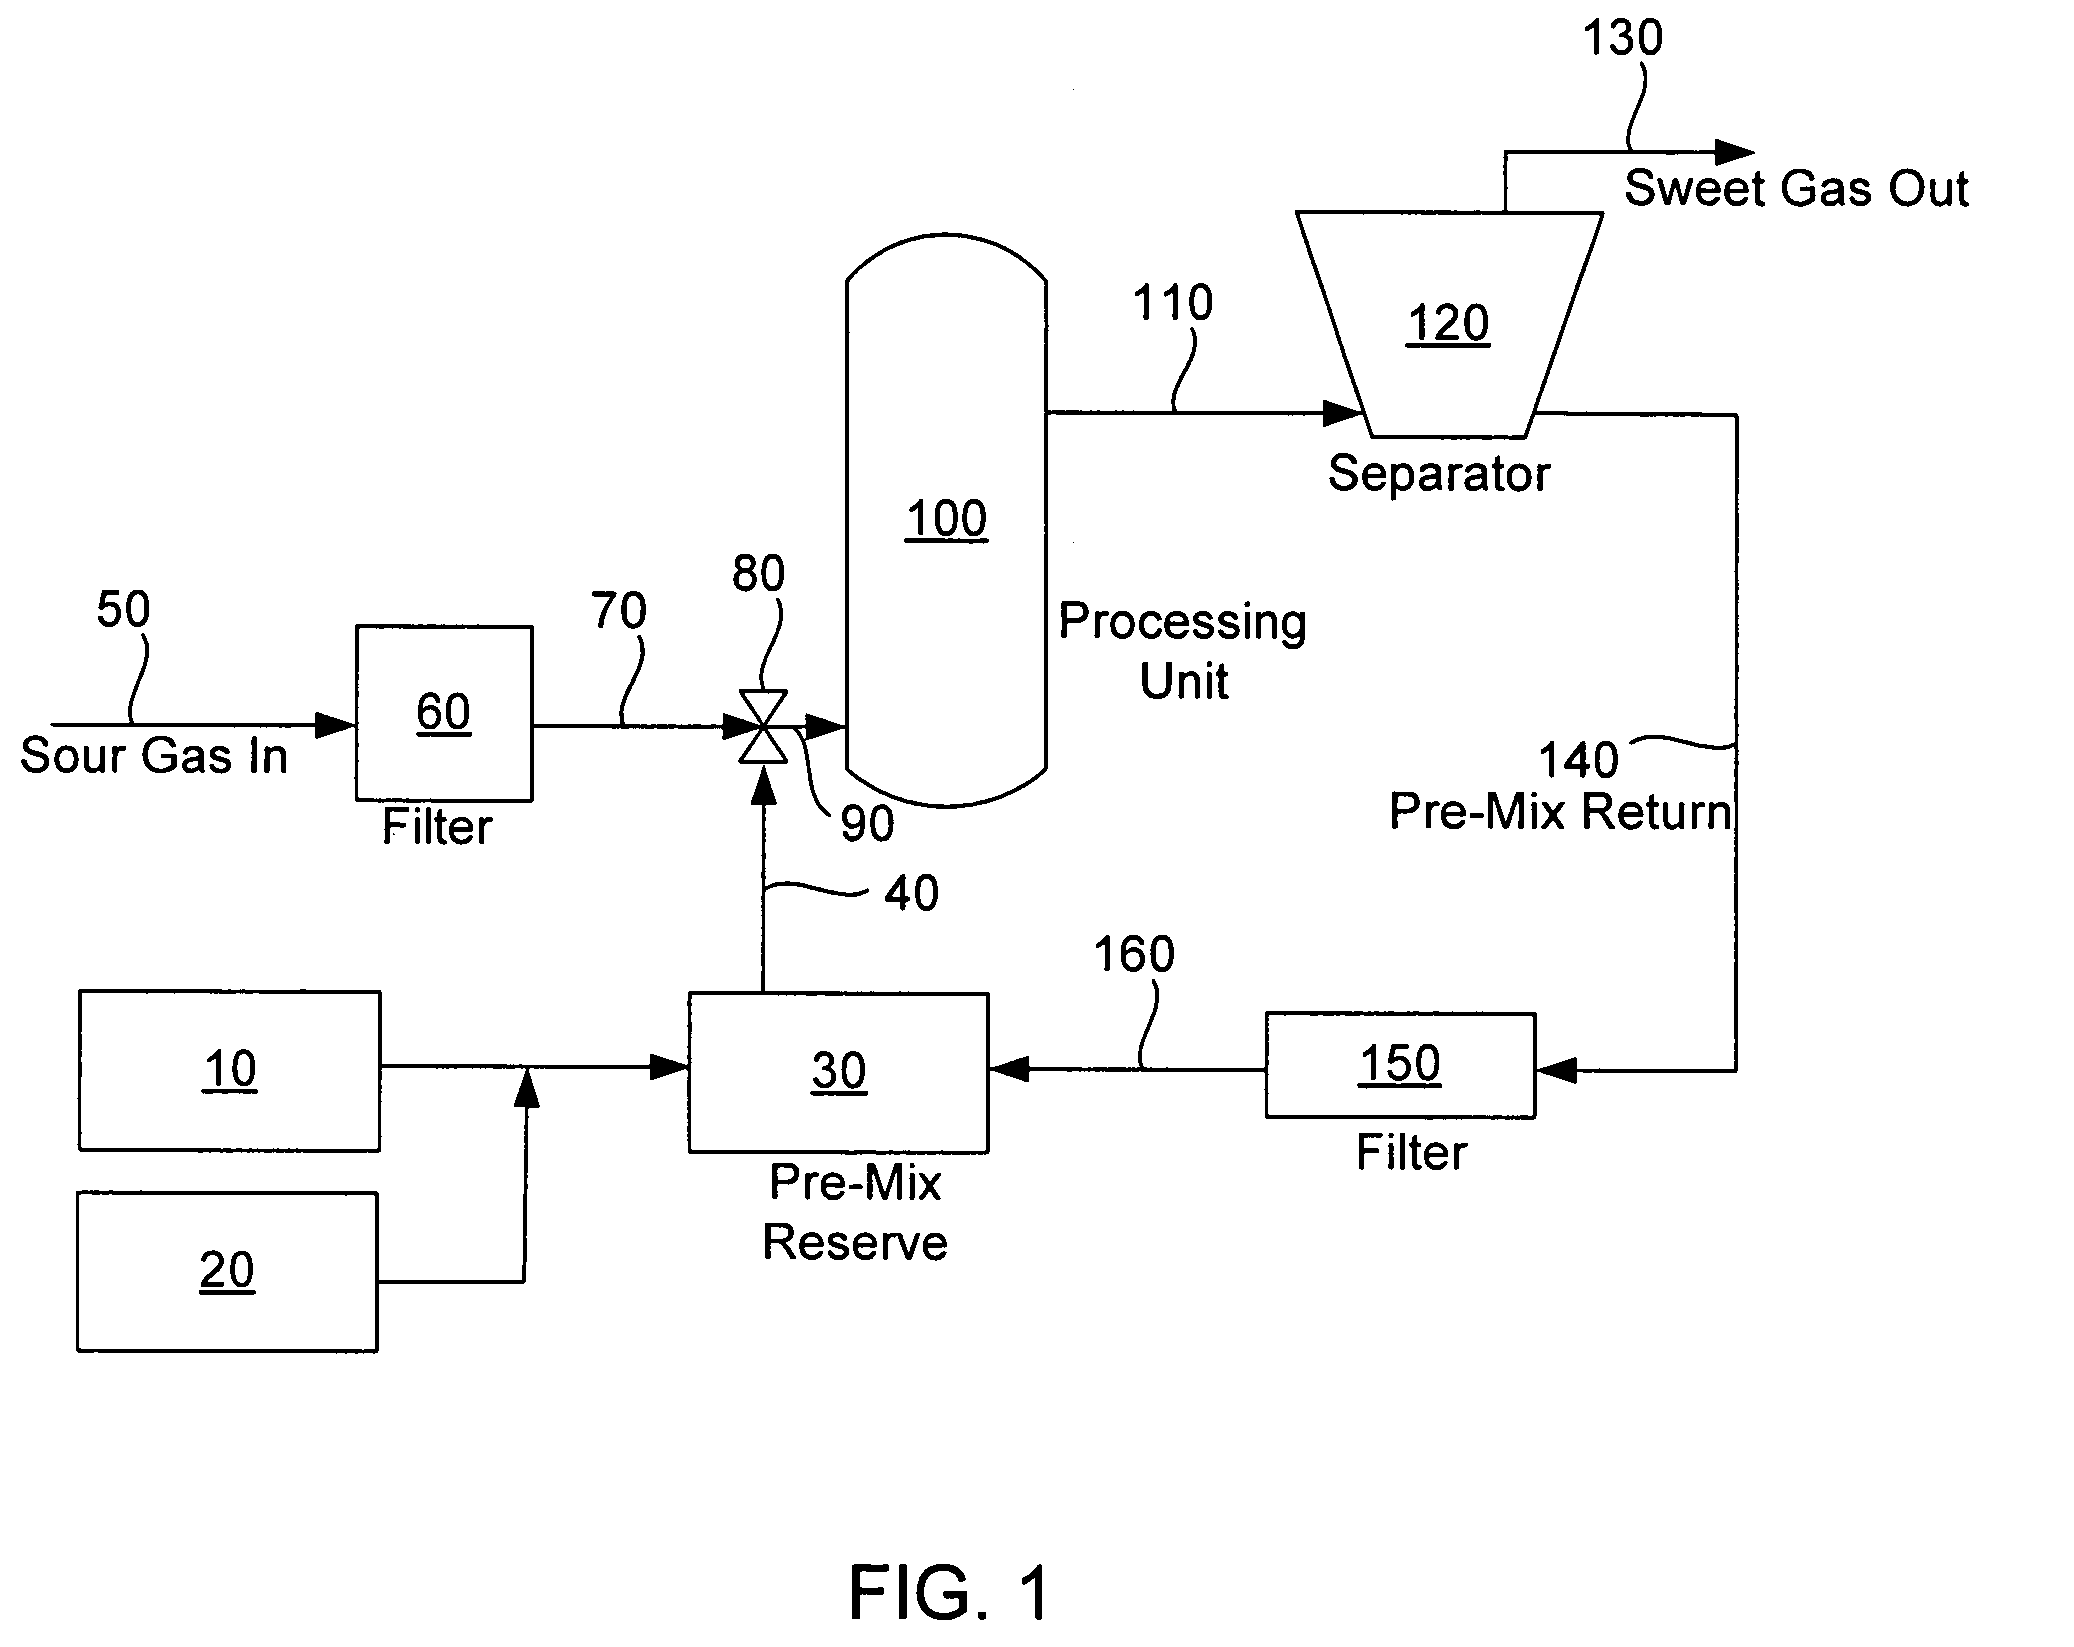 Hydrogen sulfide removal method and system for treating gaseous process streams